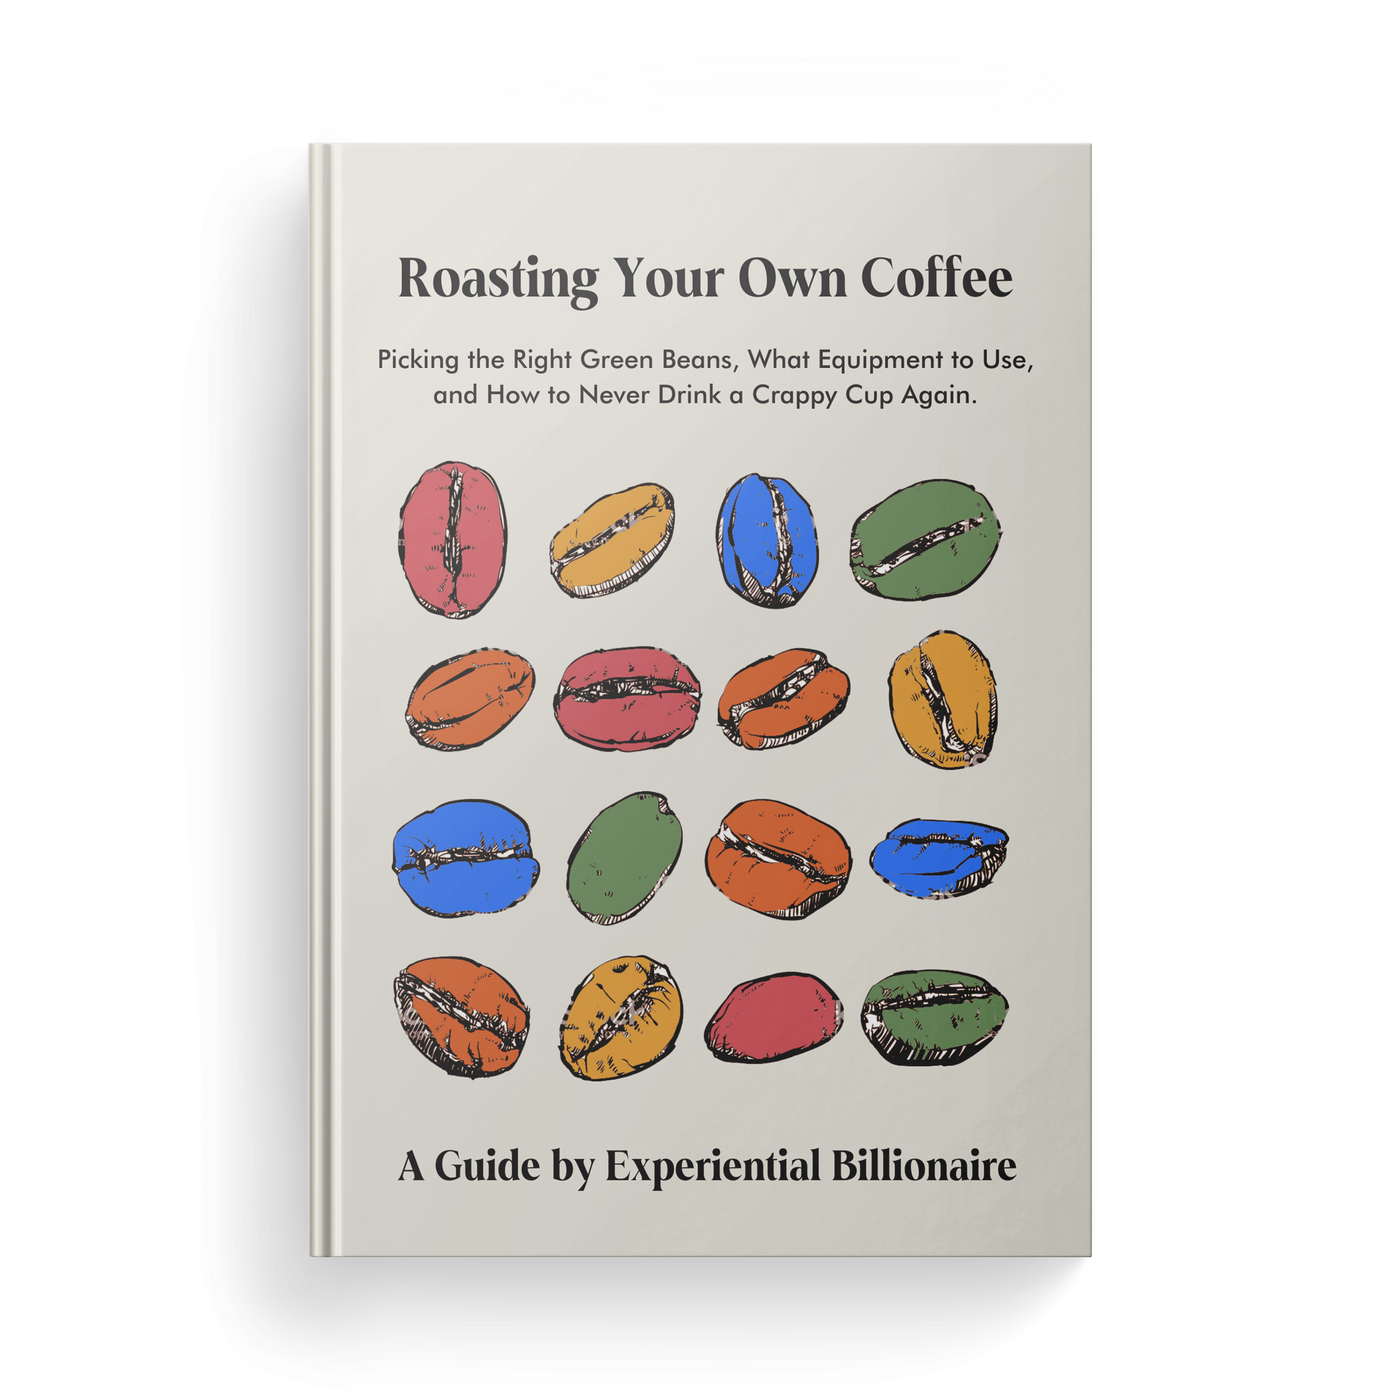 Experiential Billionaire's Guide to Roasting Your Own Coffee